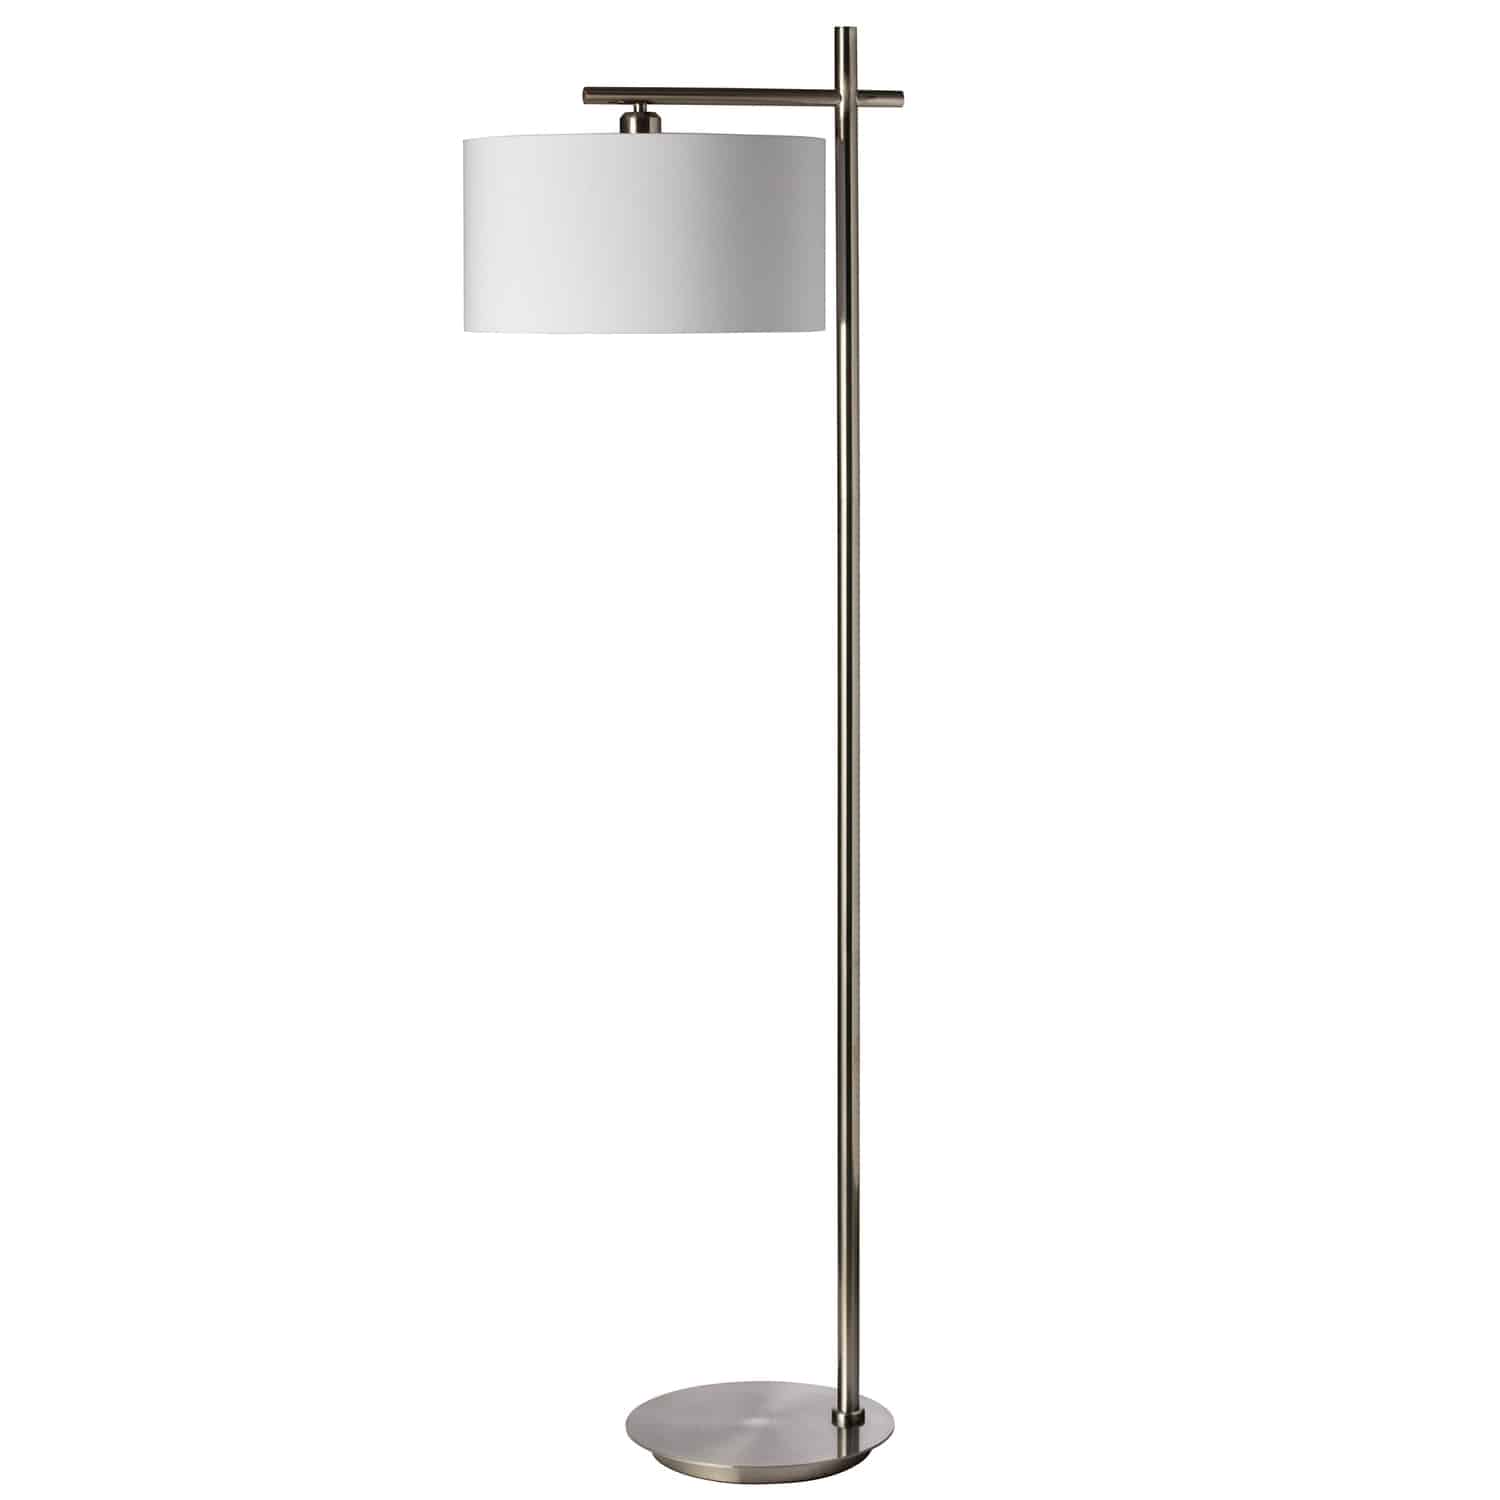 A strong linear element contrasts with a round shade to create the eye-catching style of the Floor and Table Task lighting collection. The fashionable design will complement your modern and minimalist décors. A metal base and rod in a polished chrome finish incorporates an intersecting arm that holds the classic drum style shade in white linen fabric. The table top configuration includes electrical USB plugs in the base. The stylish details add up to a practical design that will enhance your living room, bedroom or office space.